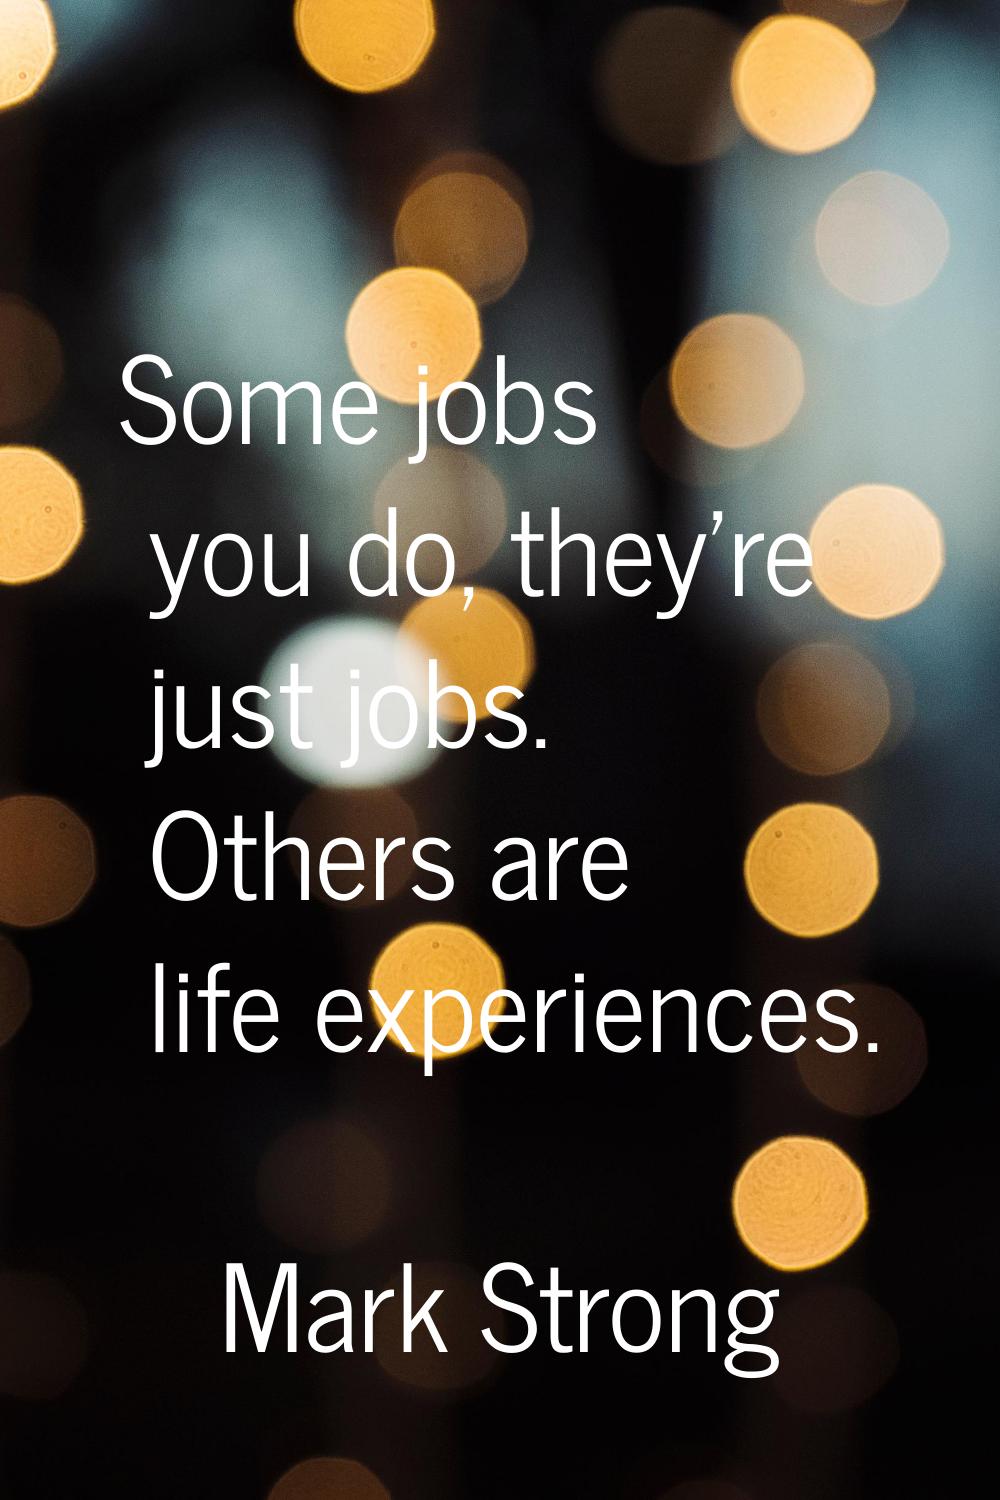 Some jobs you do, they're just jobs. Others are life experiences.